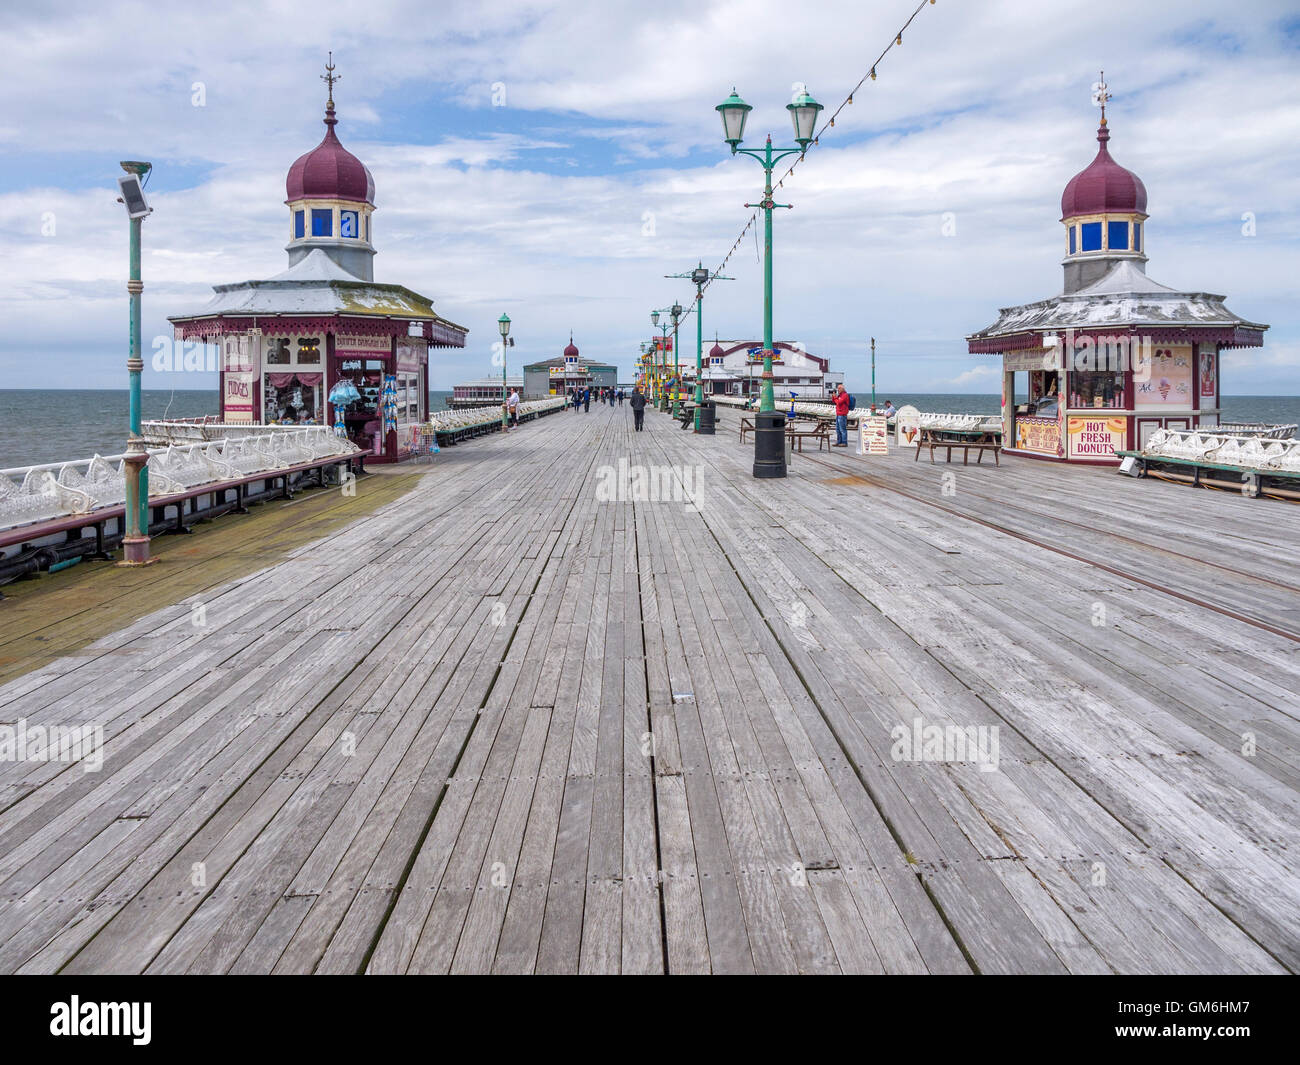 Showing the wooden floor of North Pier in Blackpool. Stock Photo